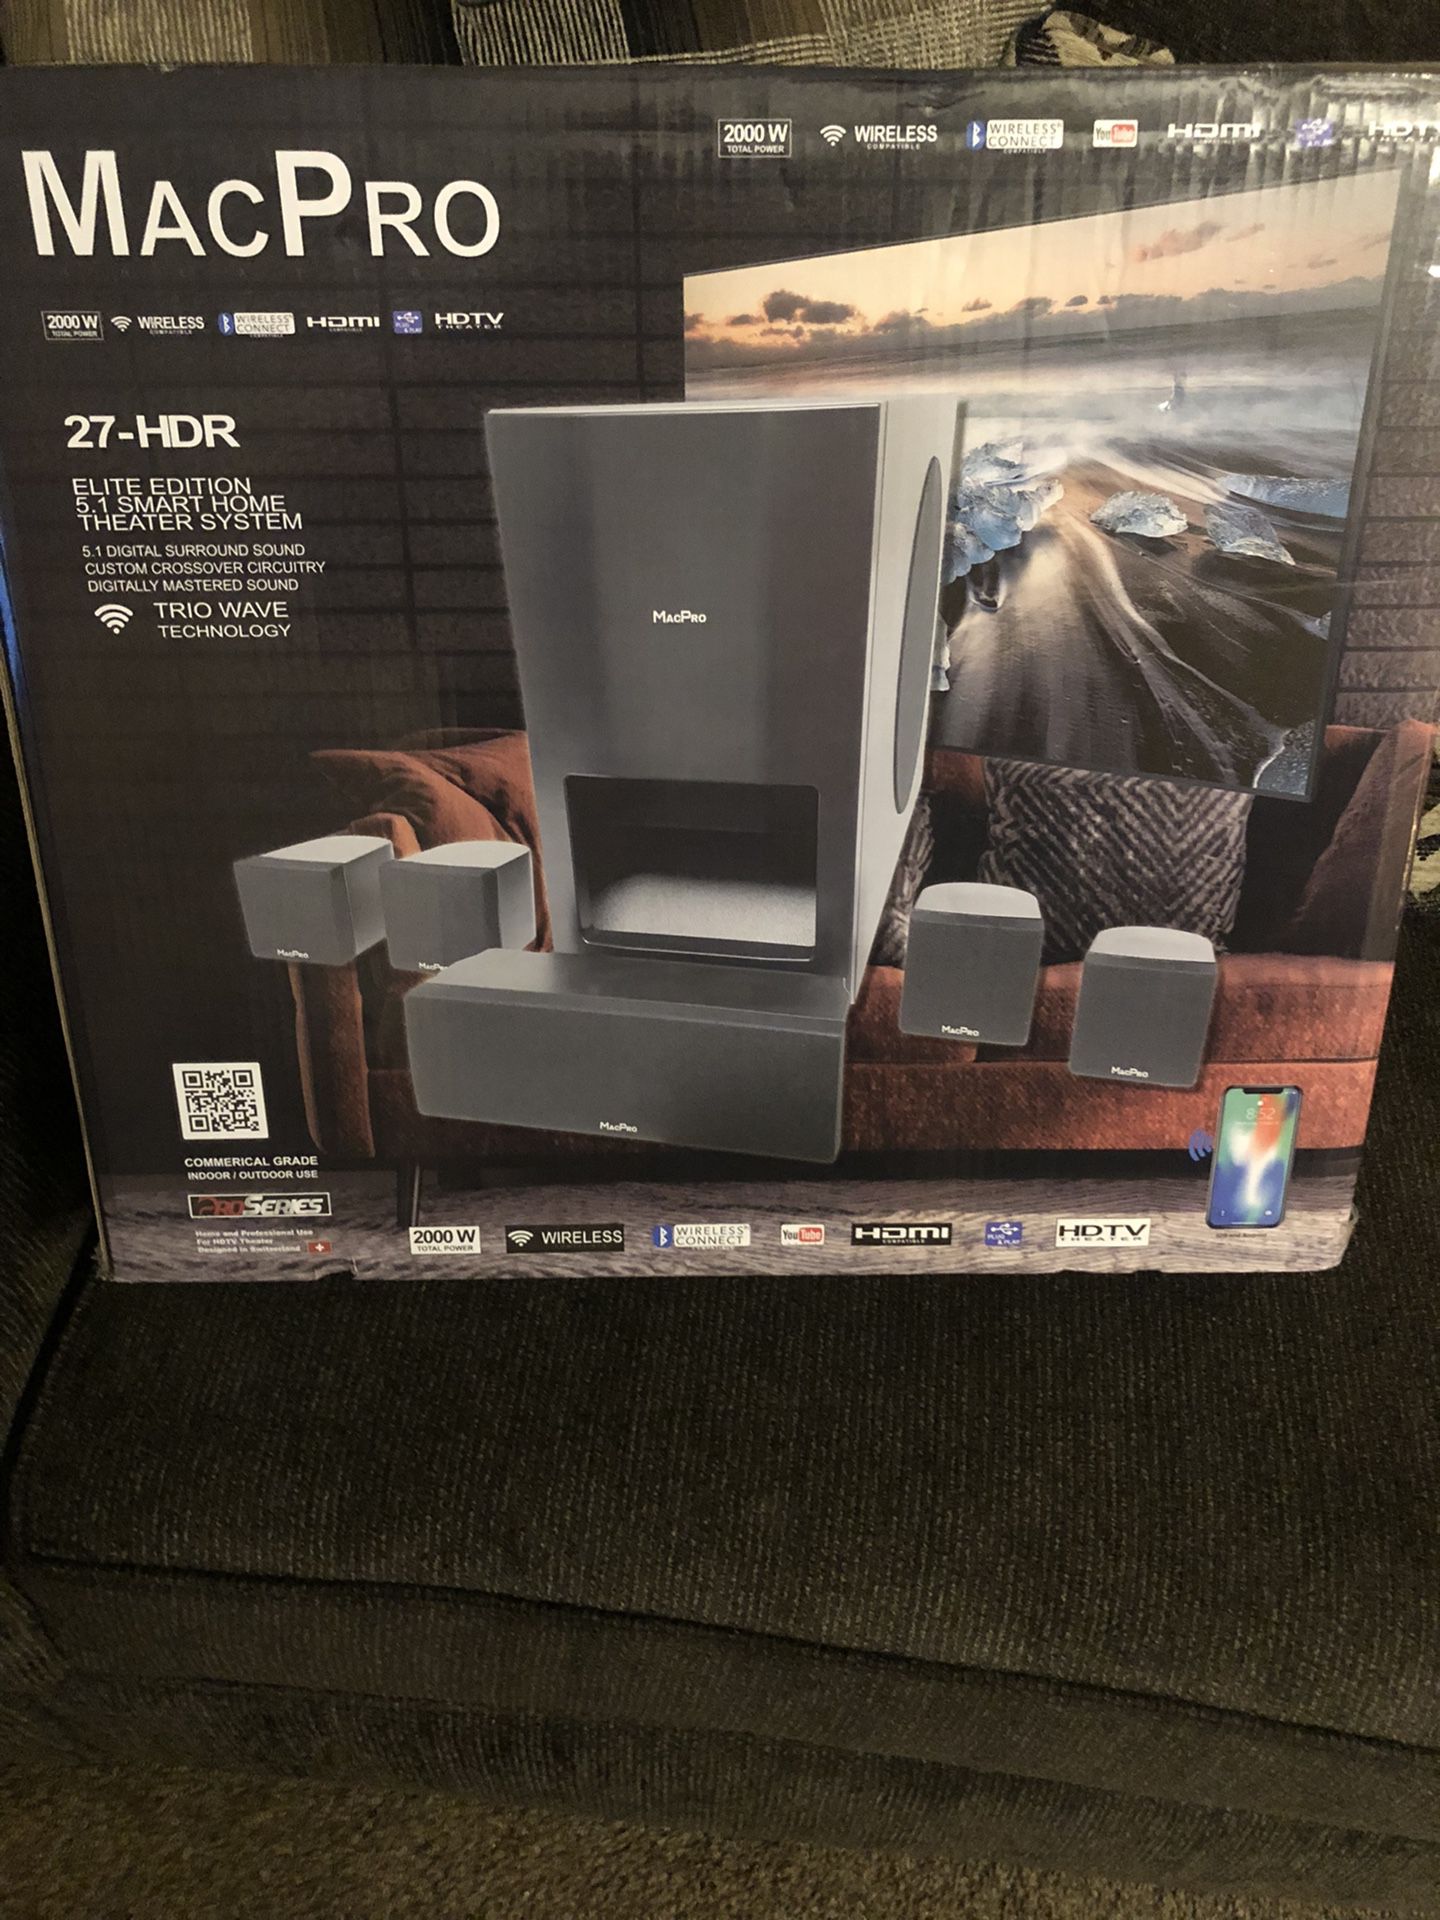 MacPro Elite Edition 5.1 Smart Home Theater